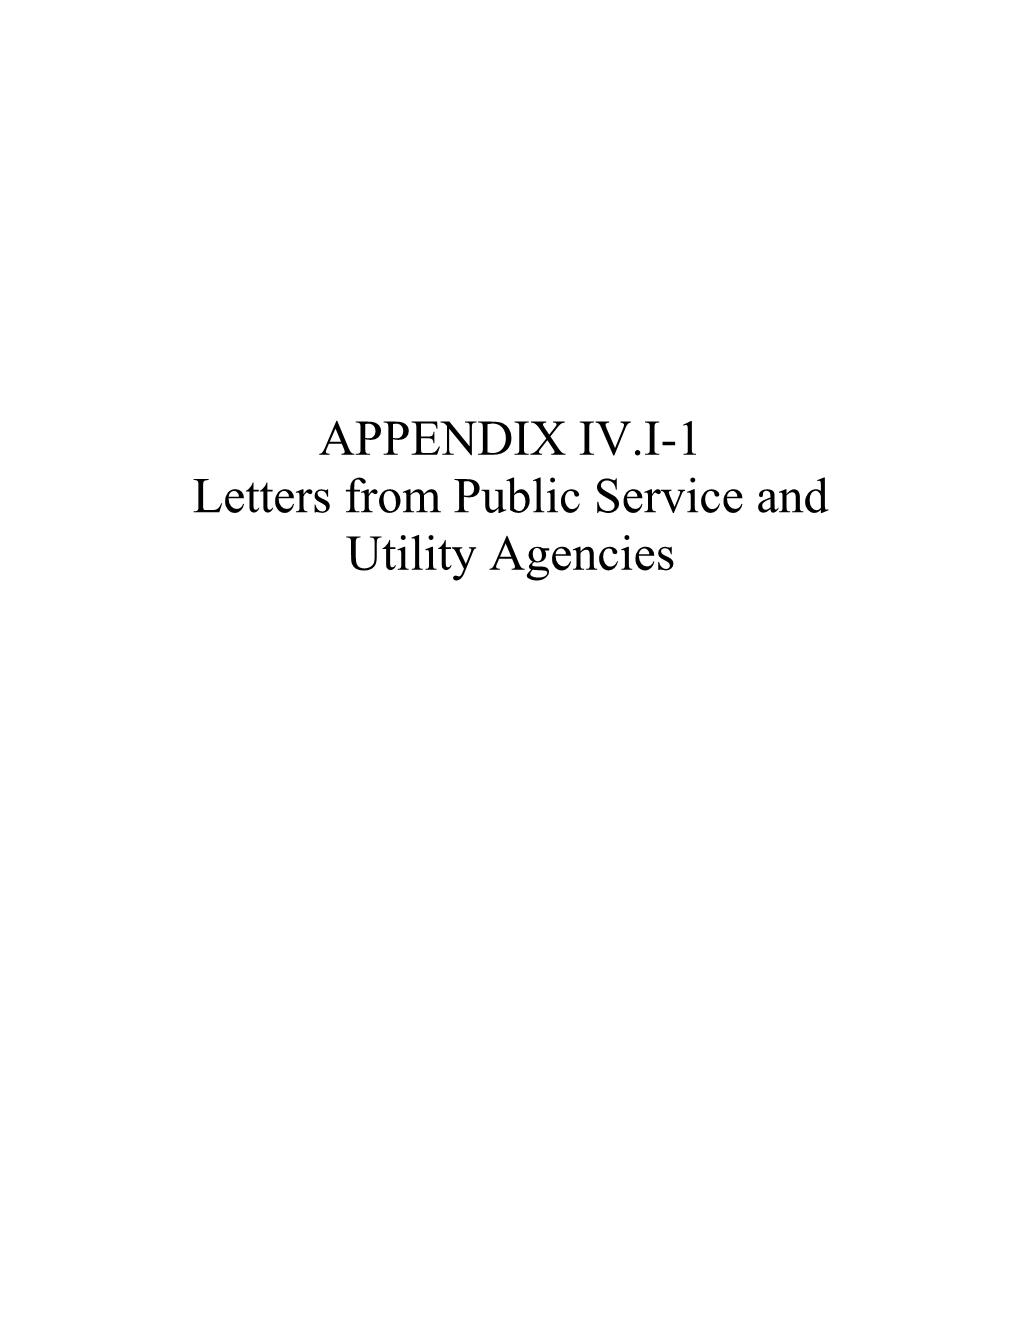 APPENDIX IV.I-1 Letters from Public Service and Utility Agencies